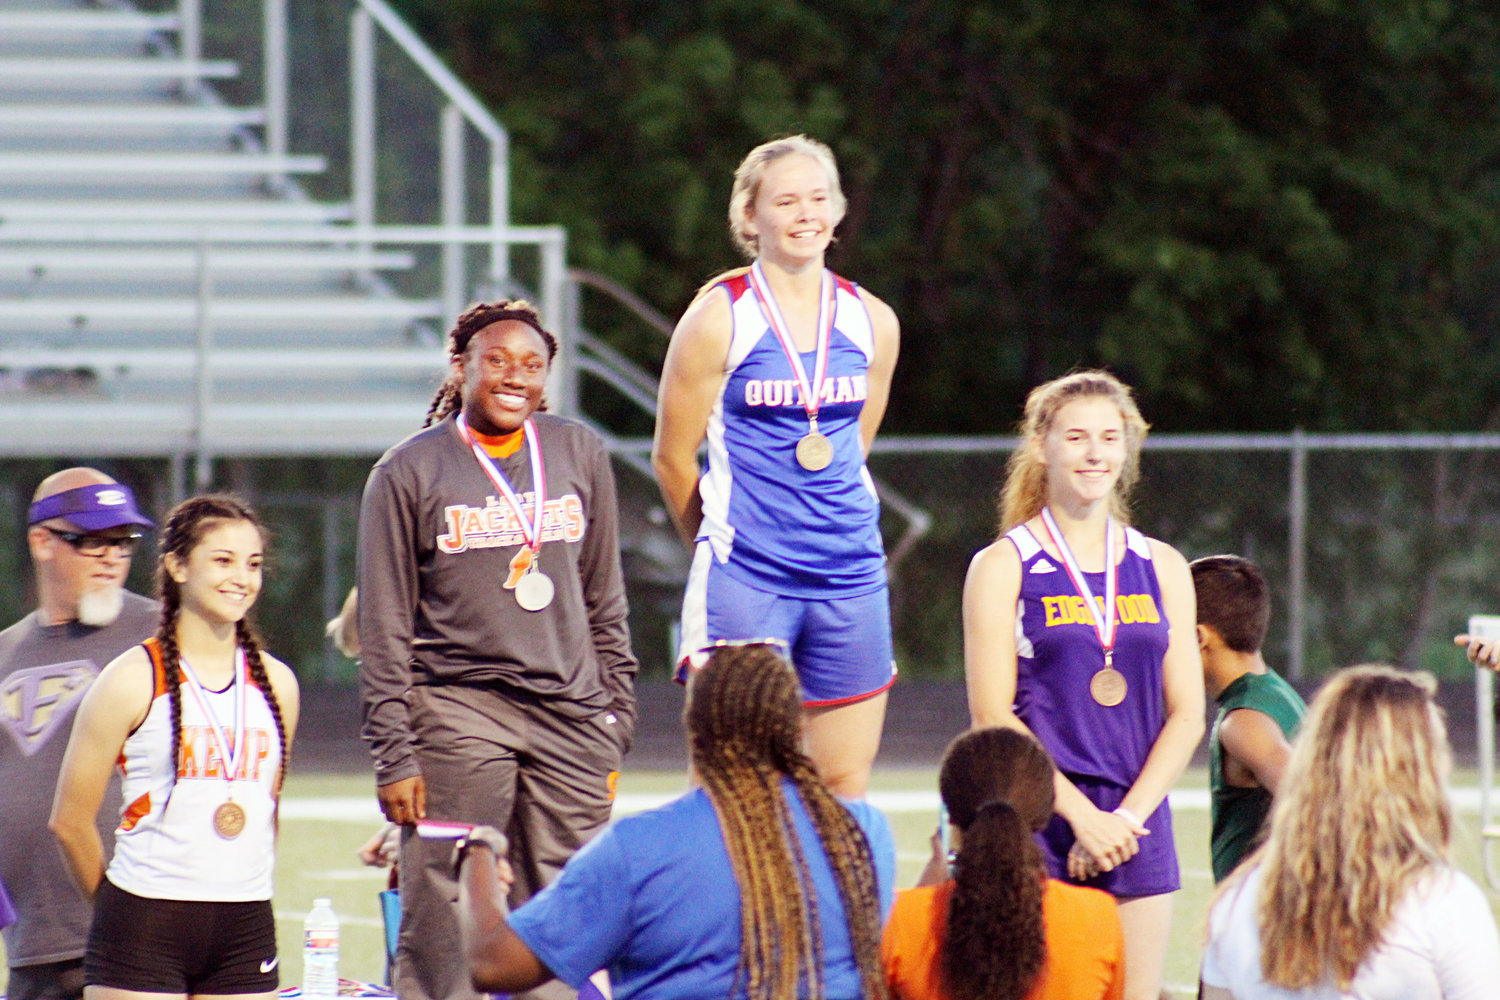 Madalyn Spears won first place in the 200M dash for the Quitman varsity team with a time of 27:05. To her left is second place winner from Mineola Jessiah Riley. (Monitor photo by Briana Harmon)